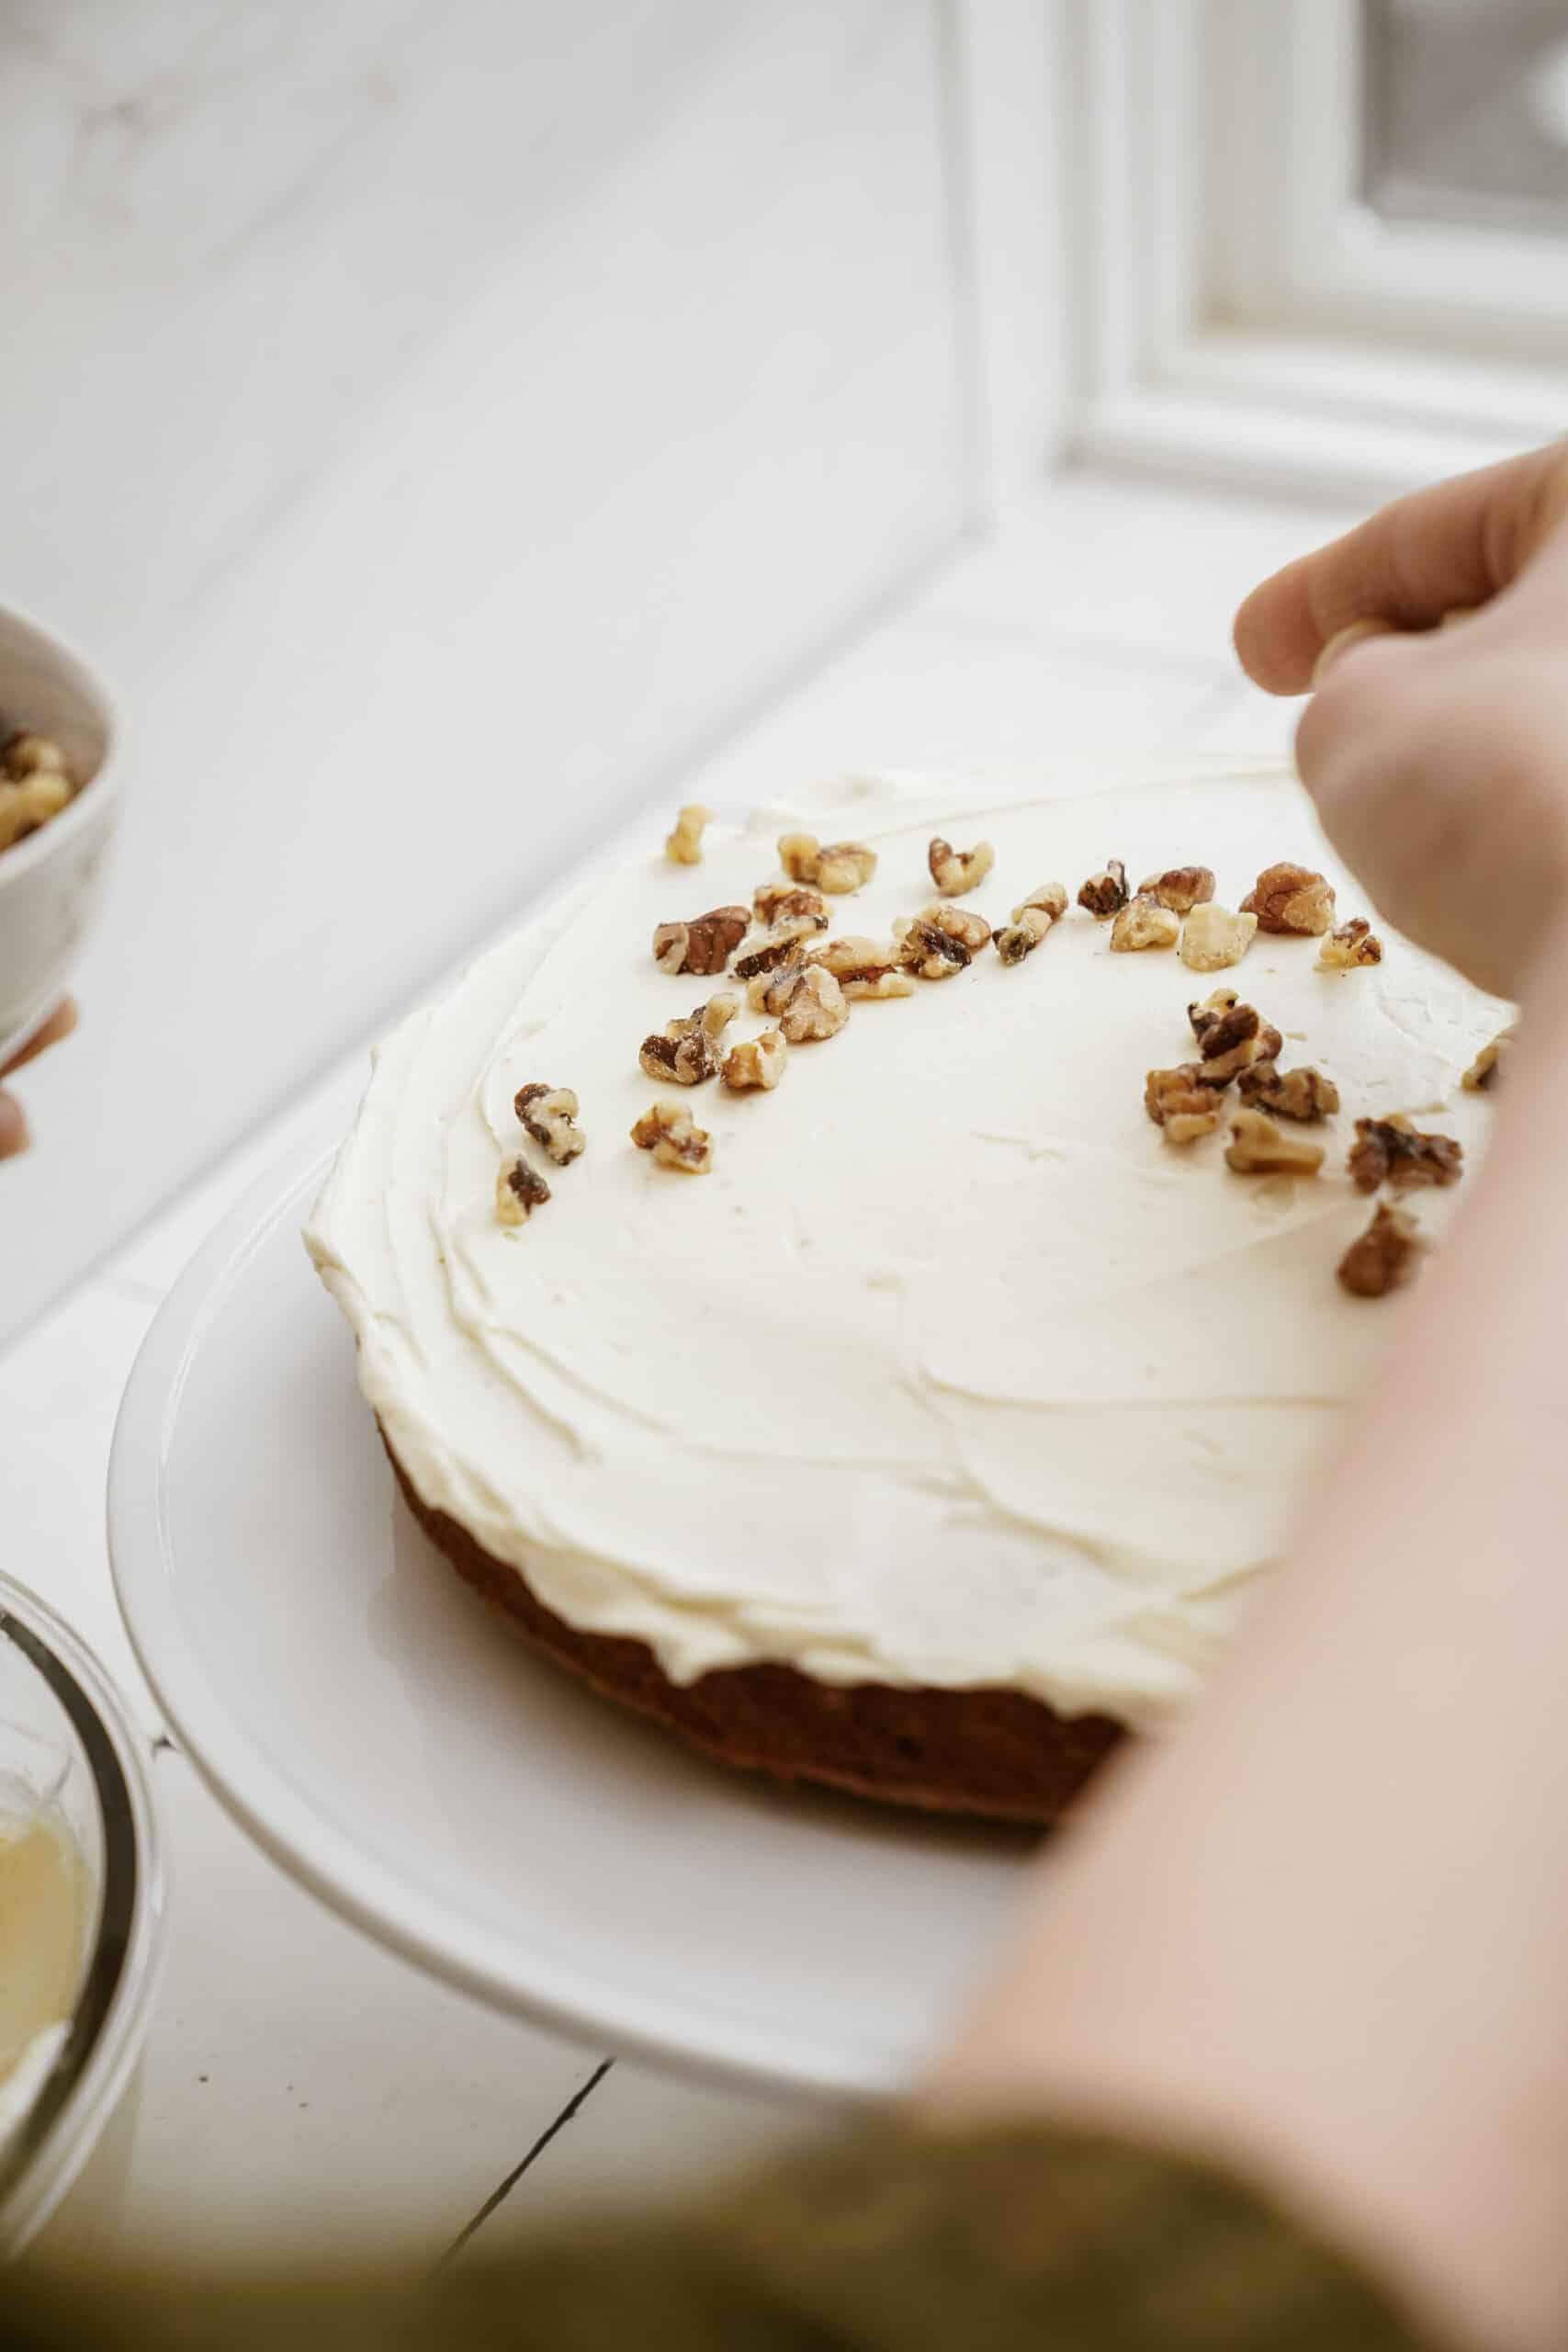 placing walnuts on carrot cake